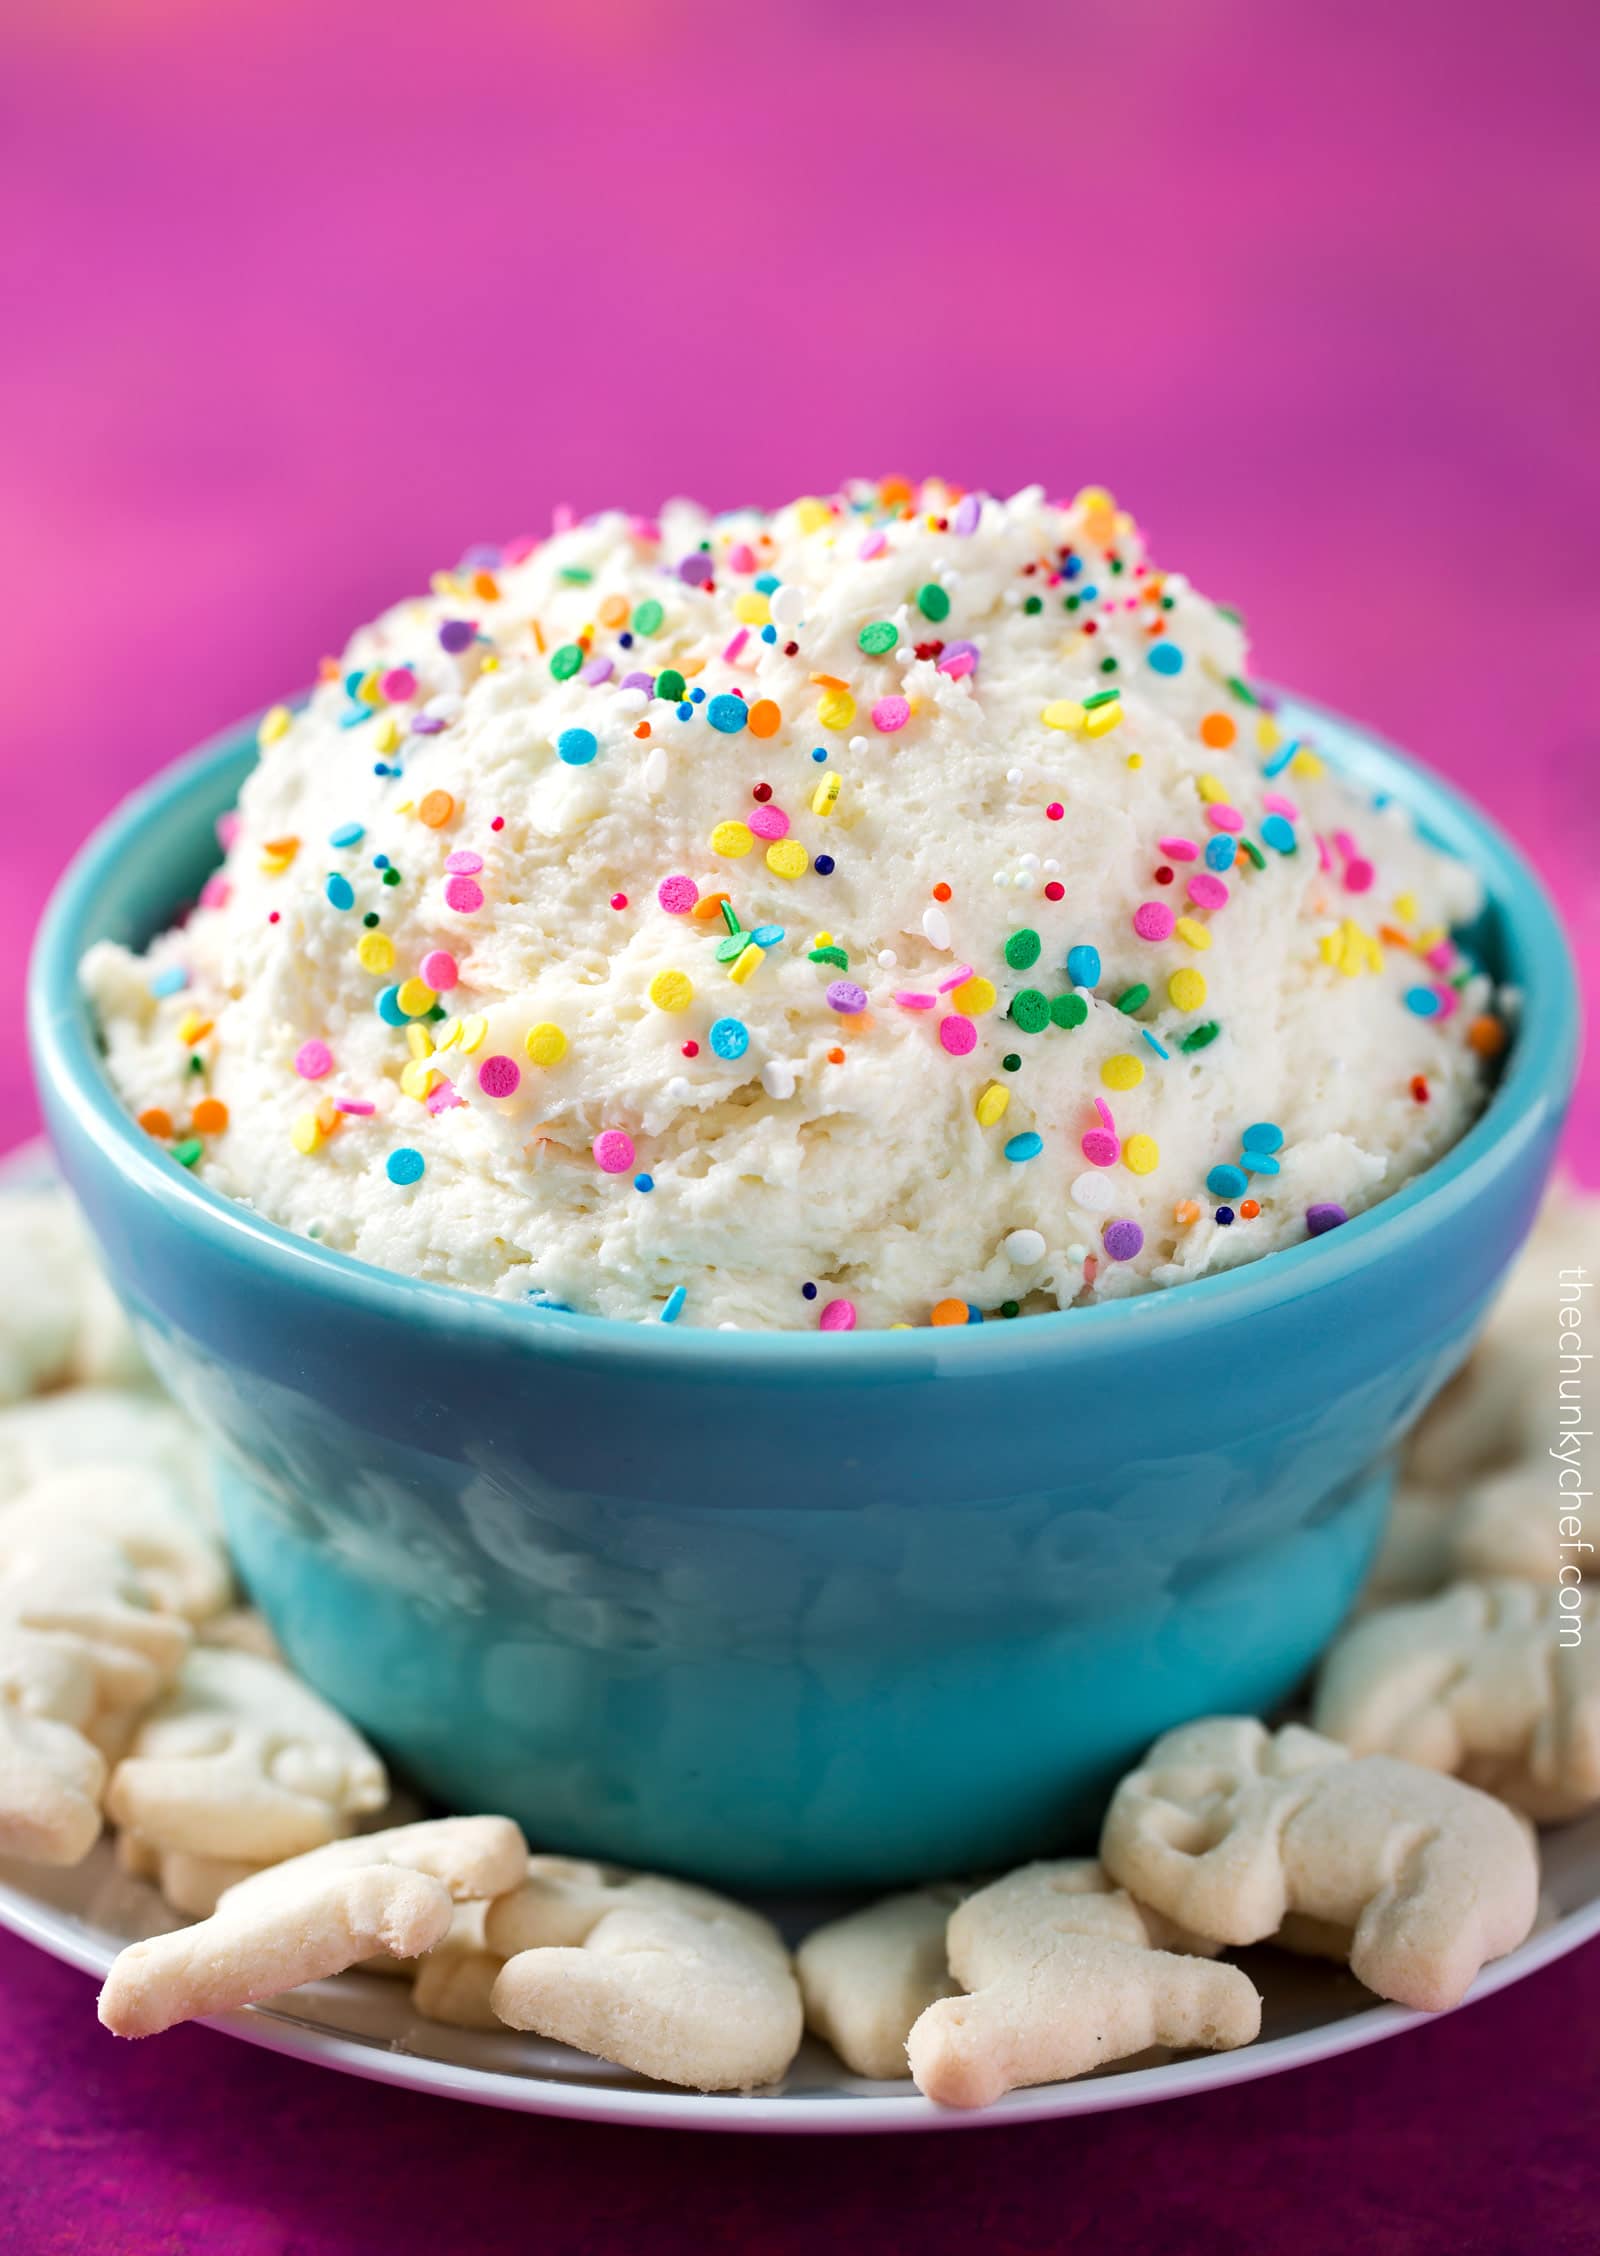 Four Ingredient Funfetti Cake Batter Dip | This dessert dip uses only 4 ingredients, is no bake, and tastes exactly like cake batter! Both kids and adults alike will love this funfetti treat! | http://thechunkychef.com